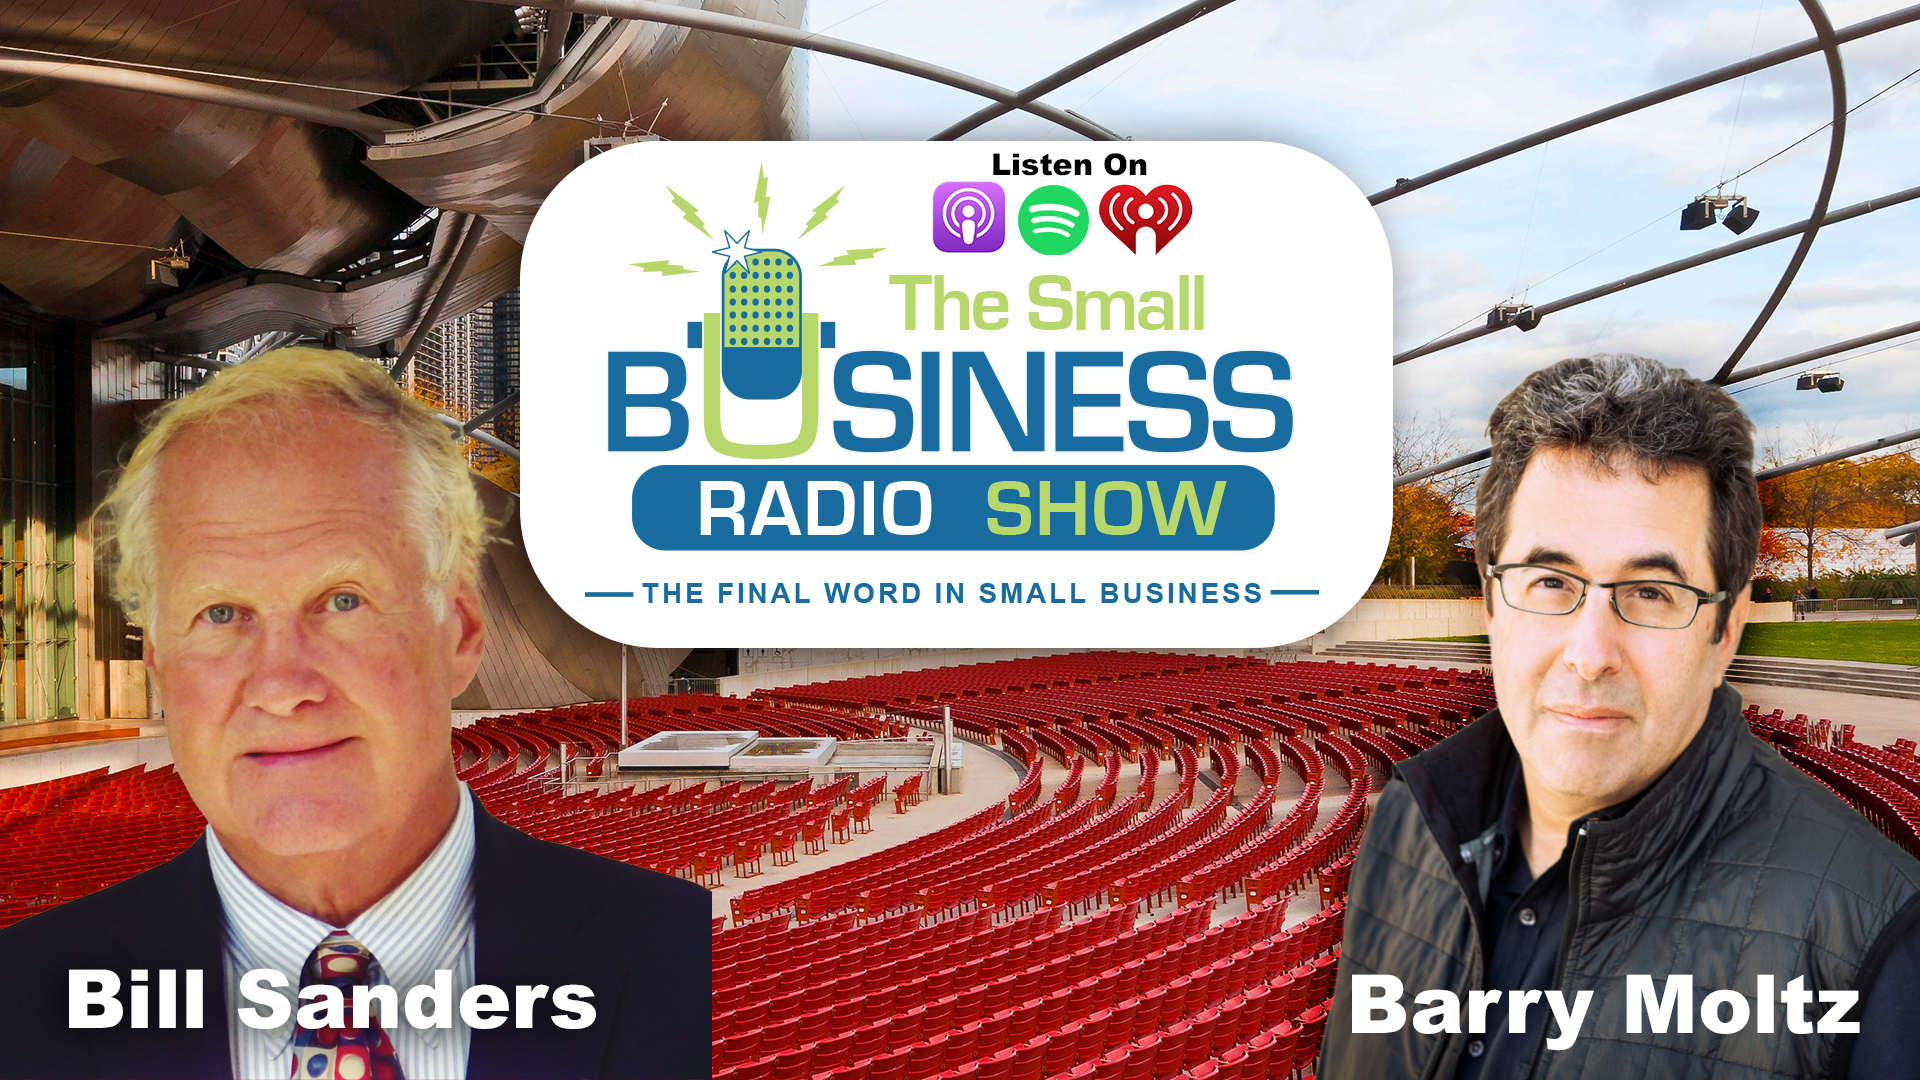 Bill Sanders on The Small Business Radio Show